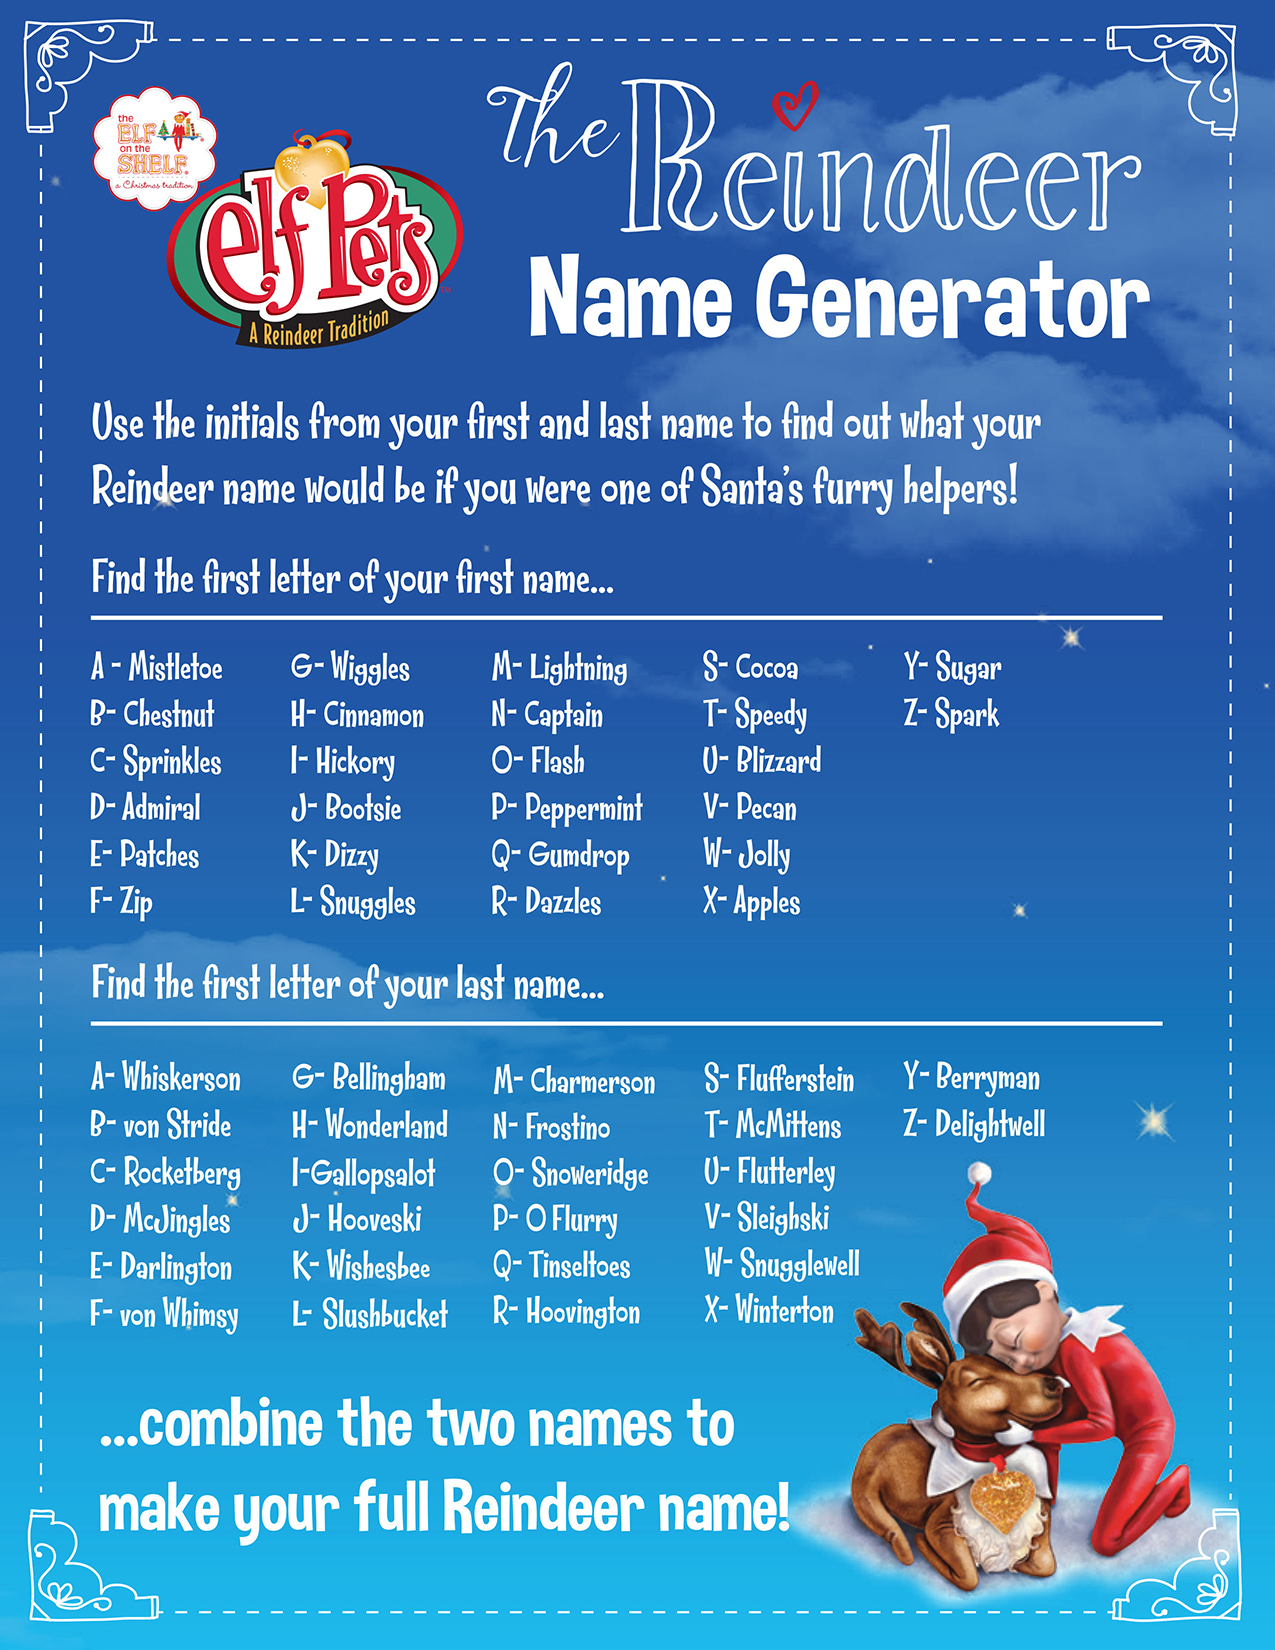 If You Were a Reindeer, What Would Your Name Be? | Elf On The Shelf UK